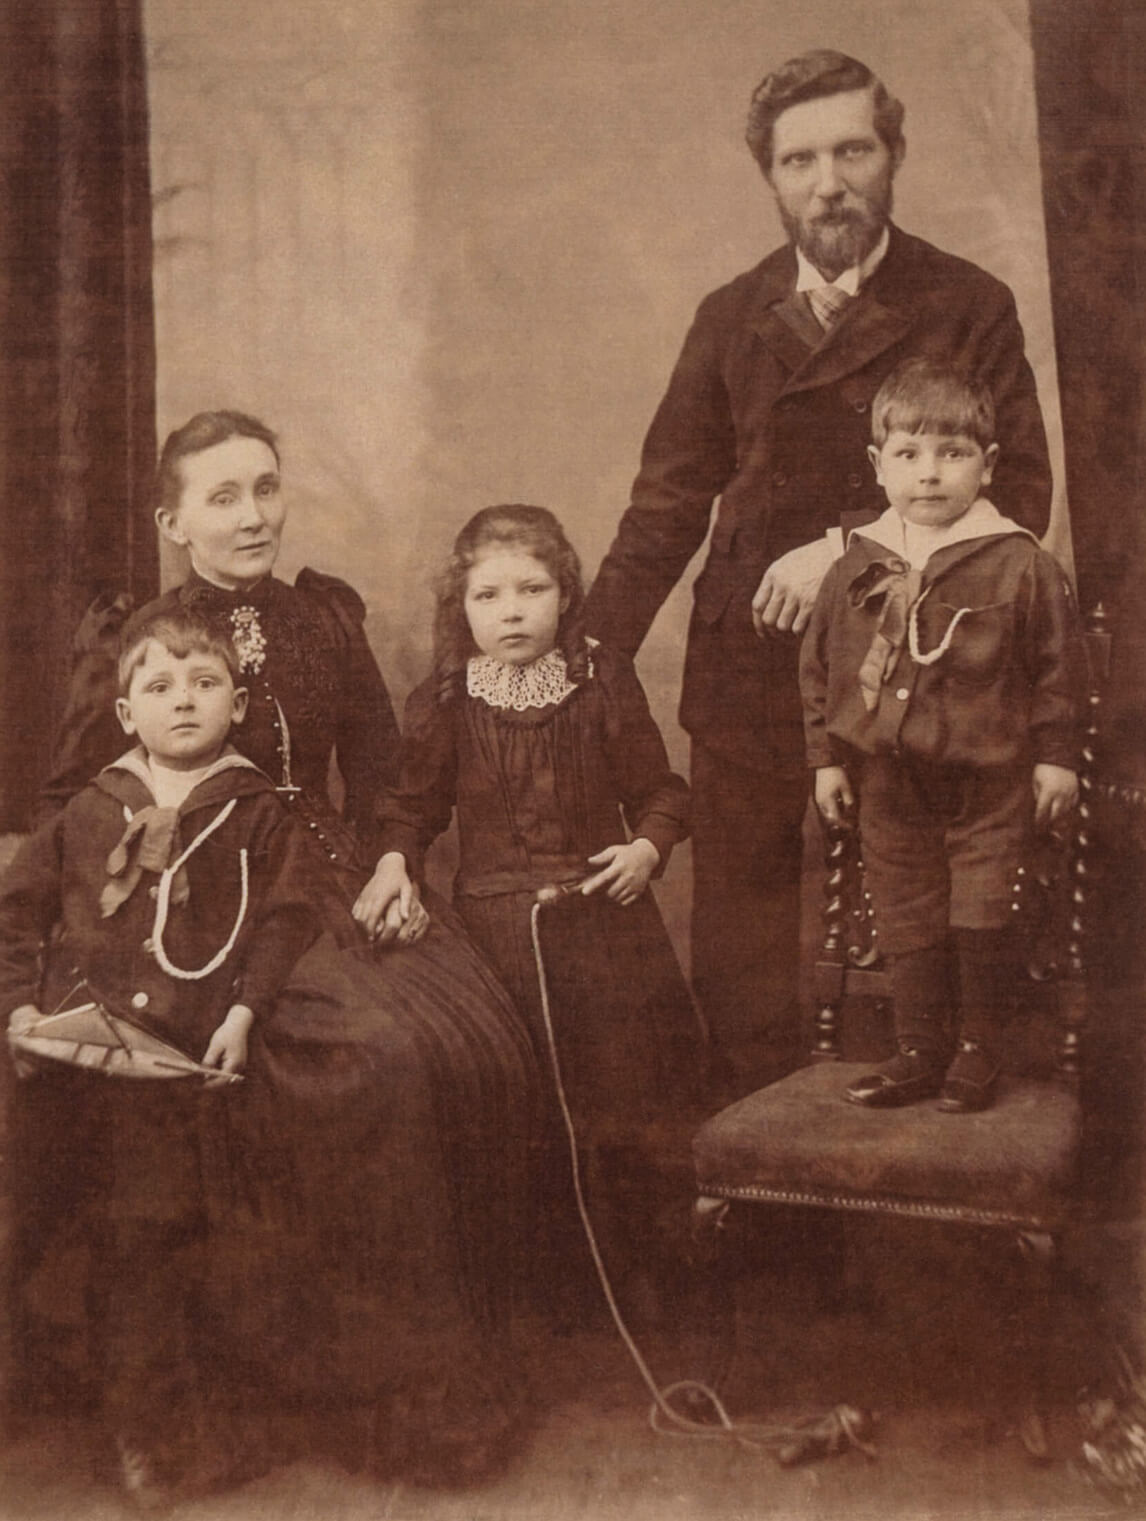 Photograph of Bertram Brooker with his parents and younger siblings in England, 1890s